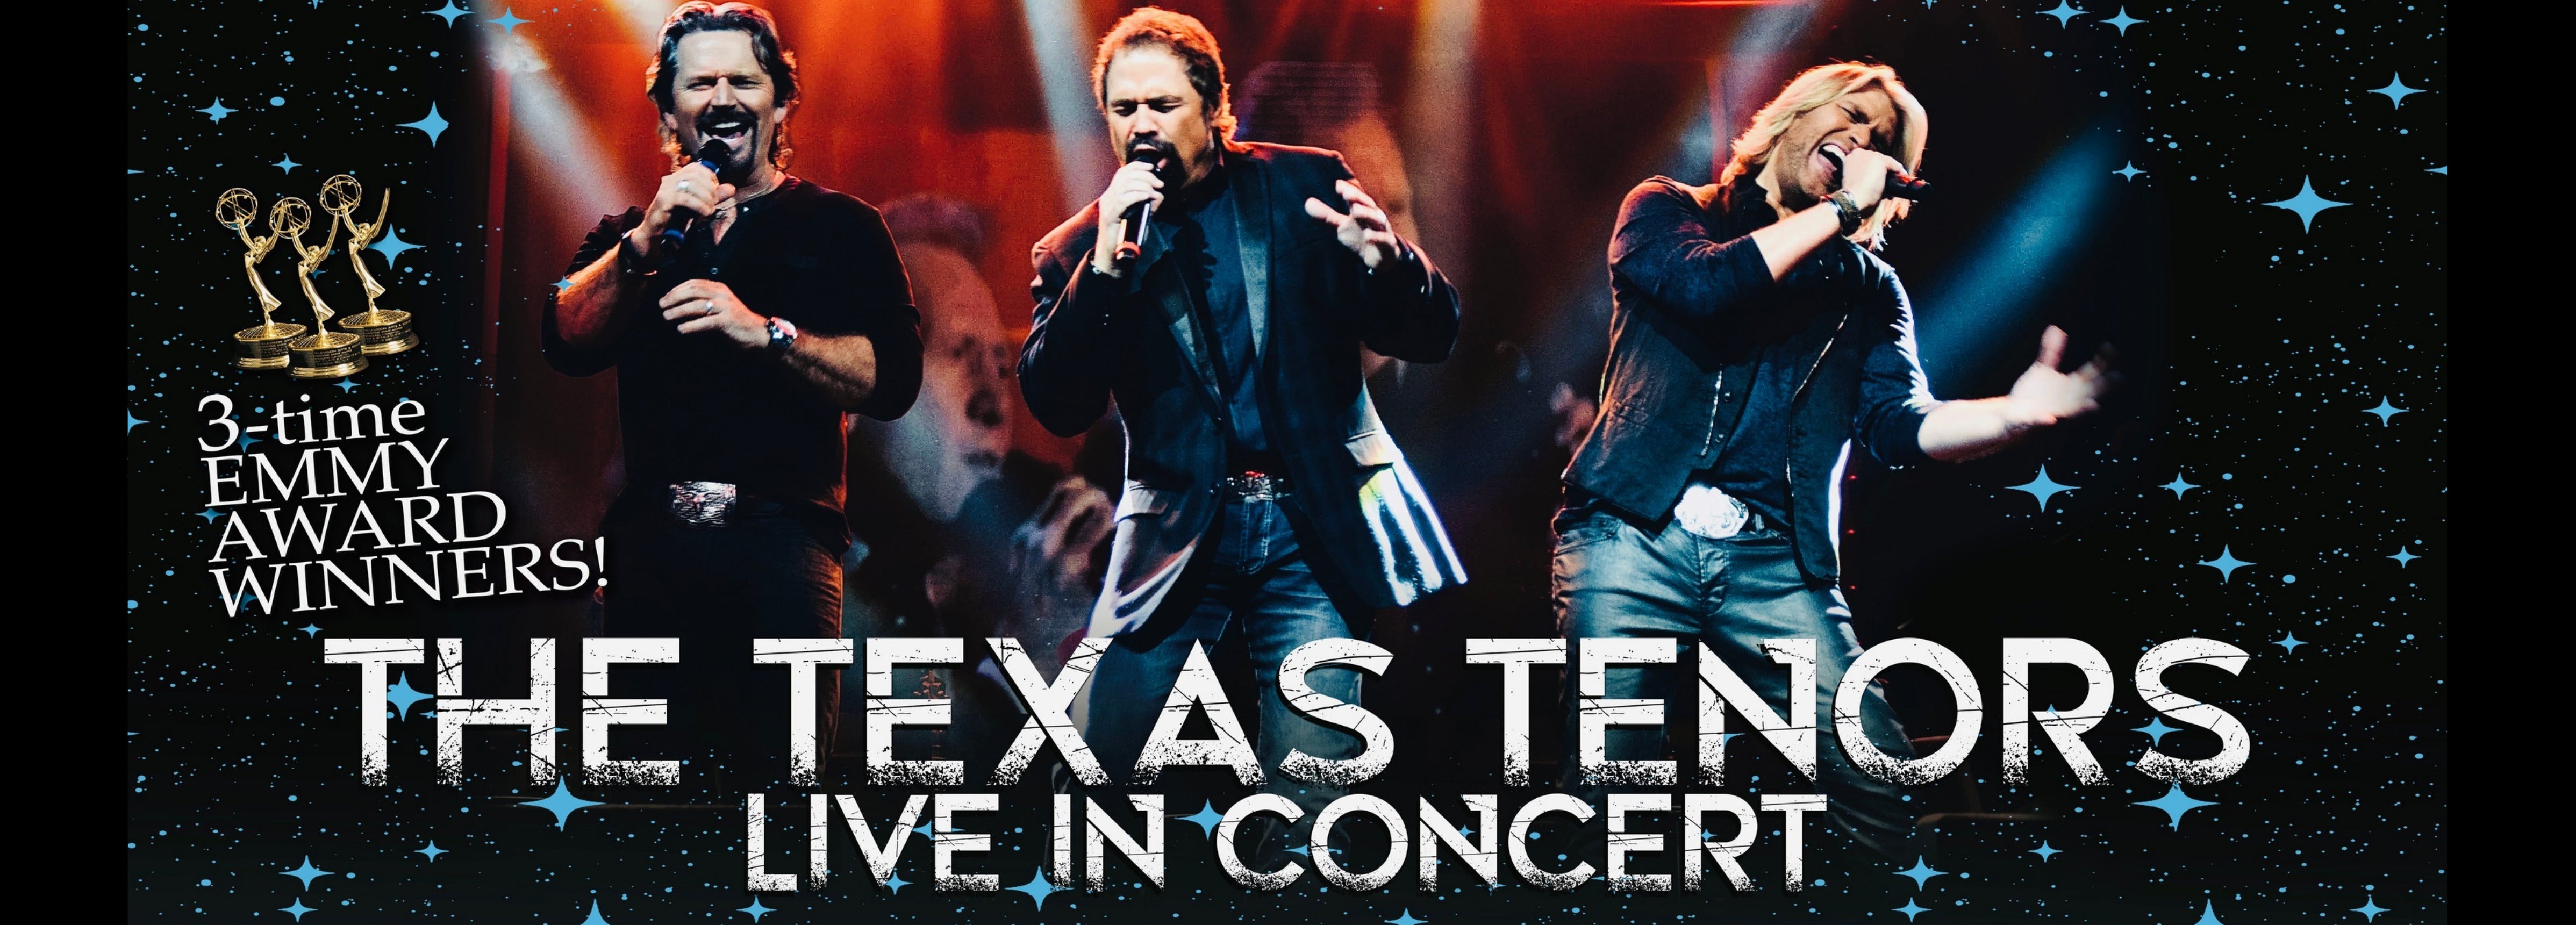 The Texas Tenors Oxford Performing Arts Center